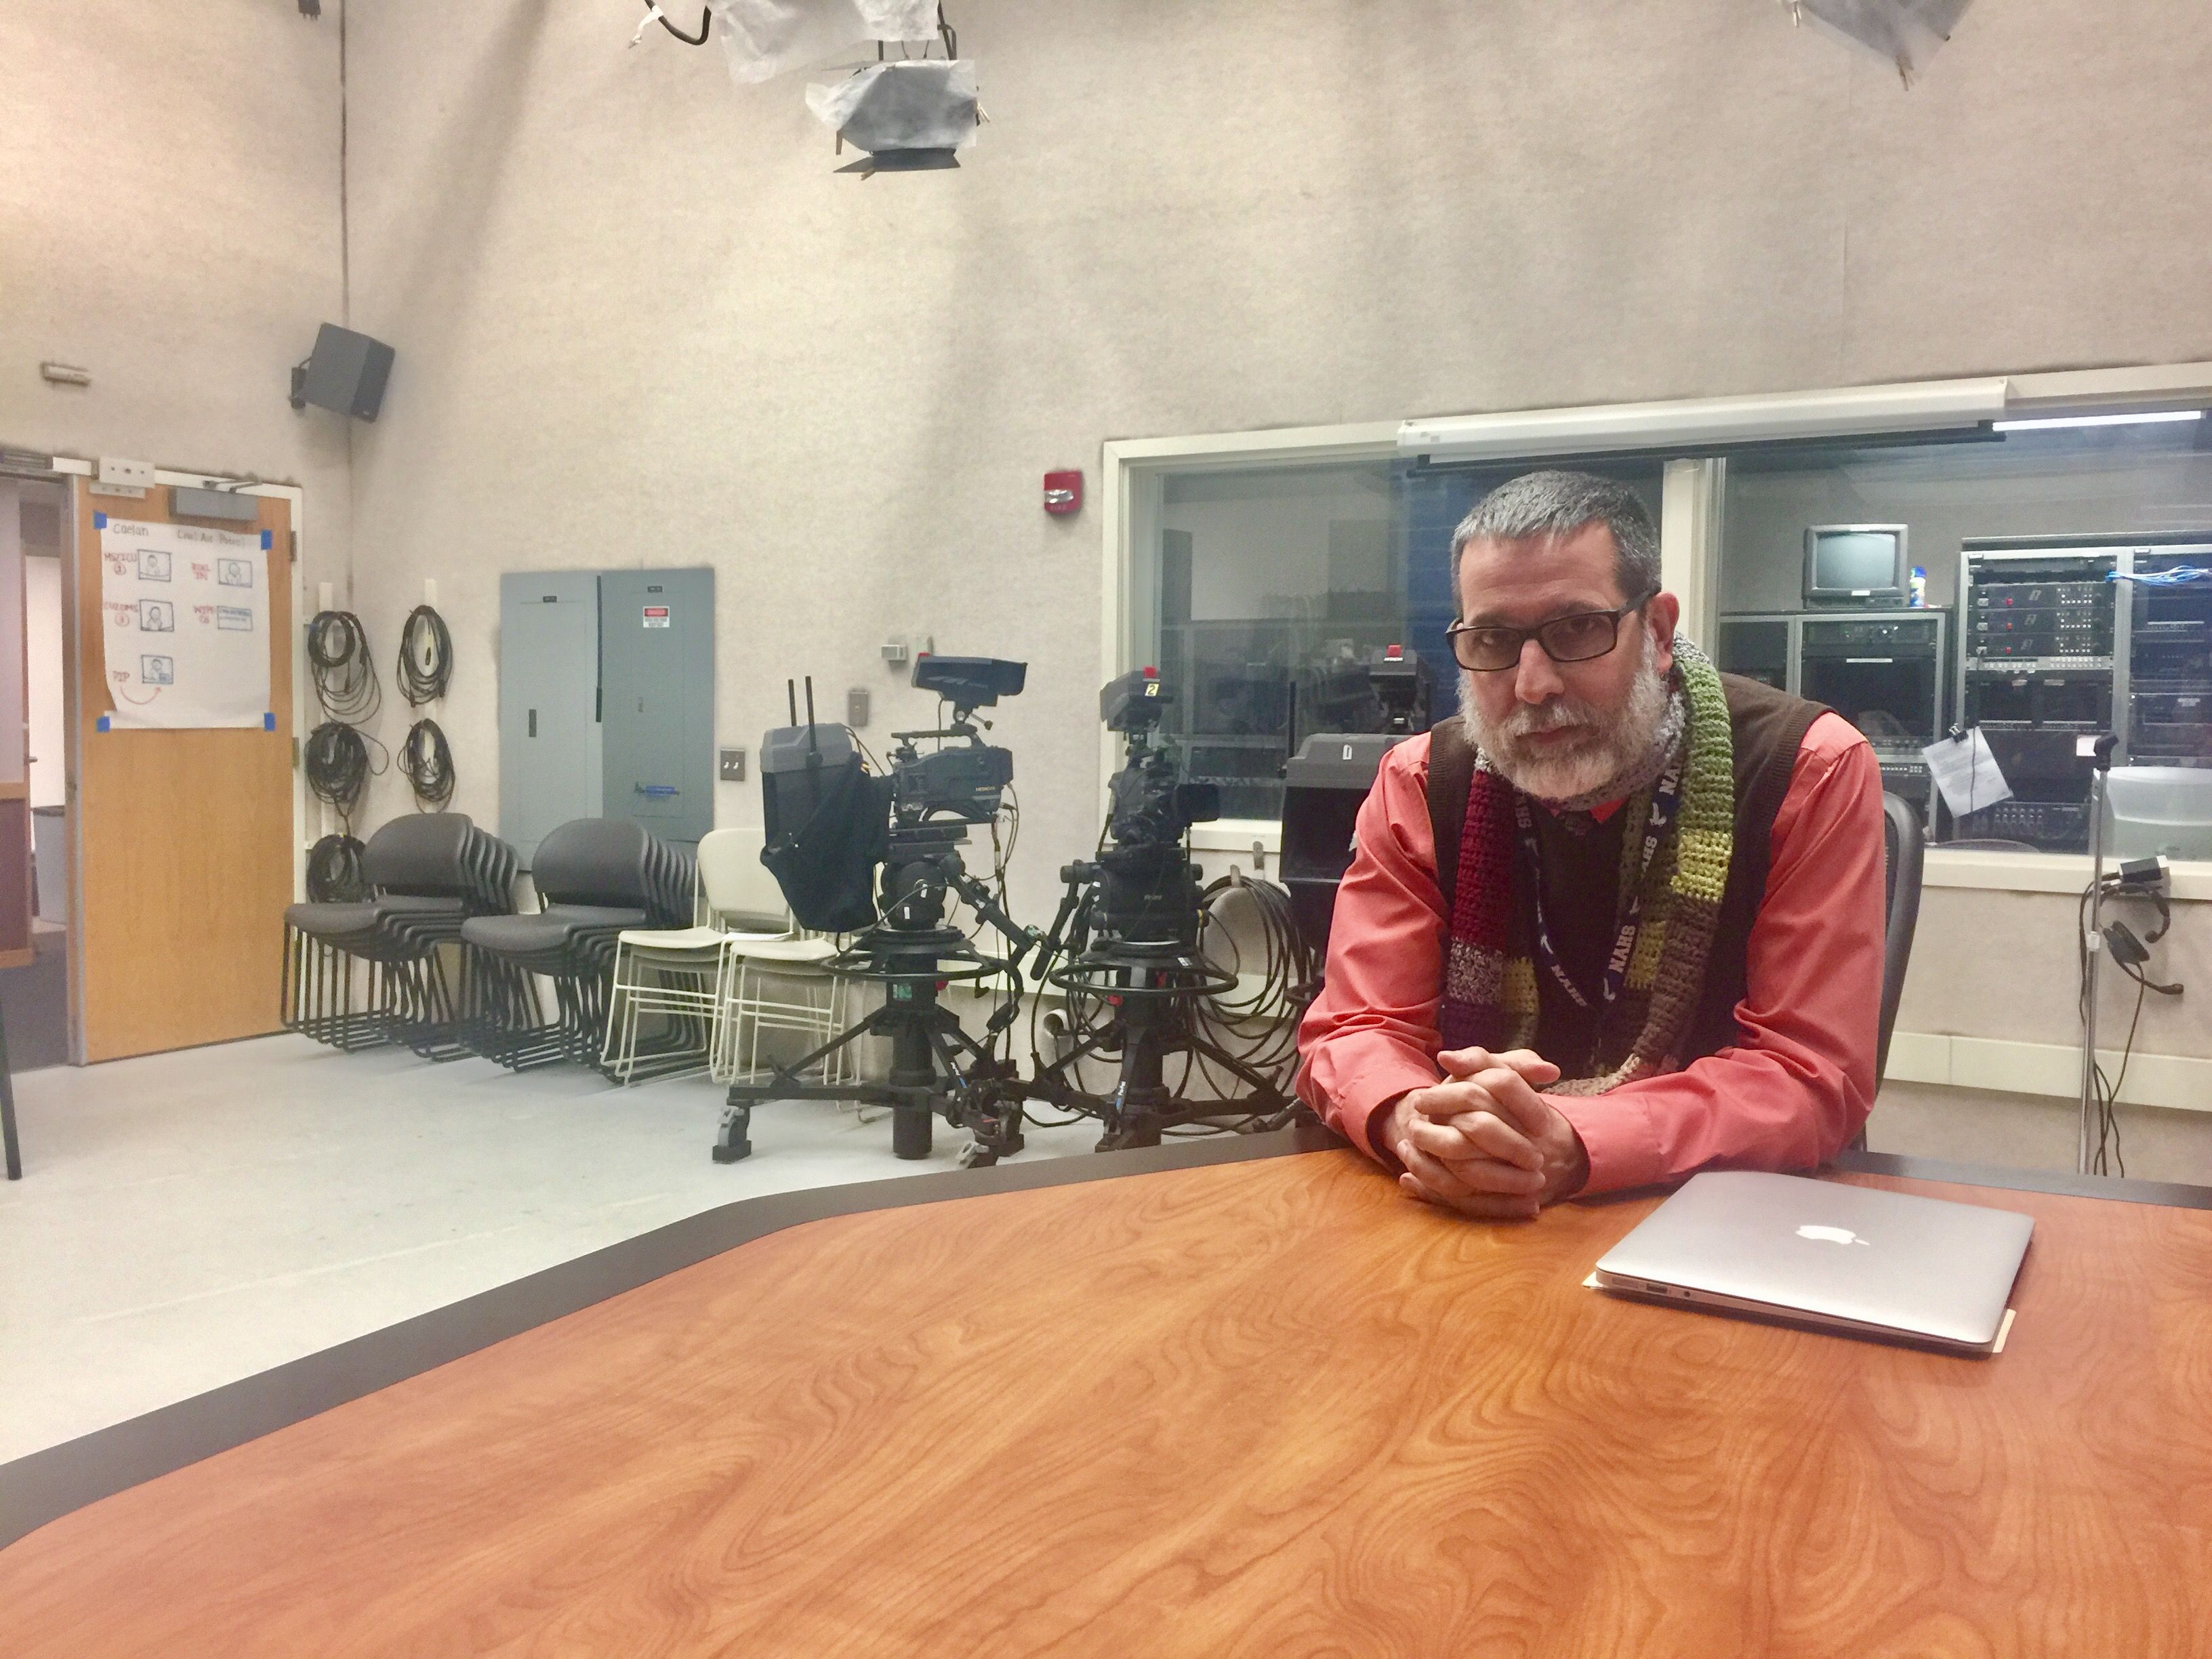 This is adjunct professor John Doyle's first time teaching Video Production at Cabrini.